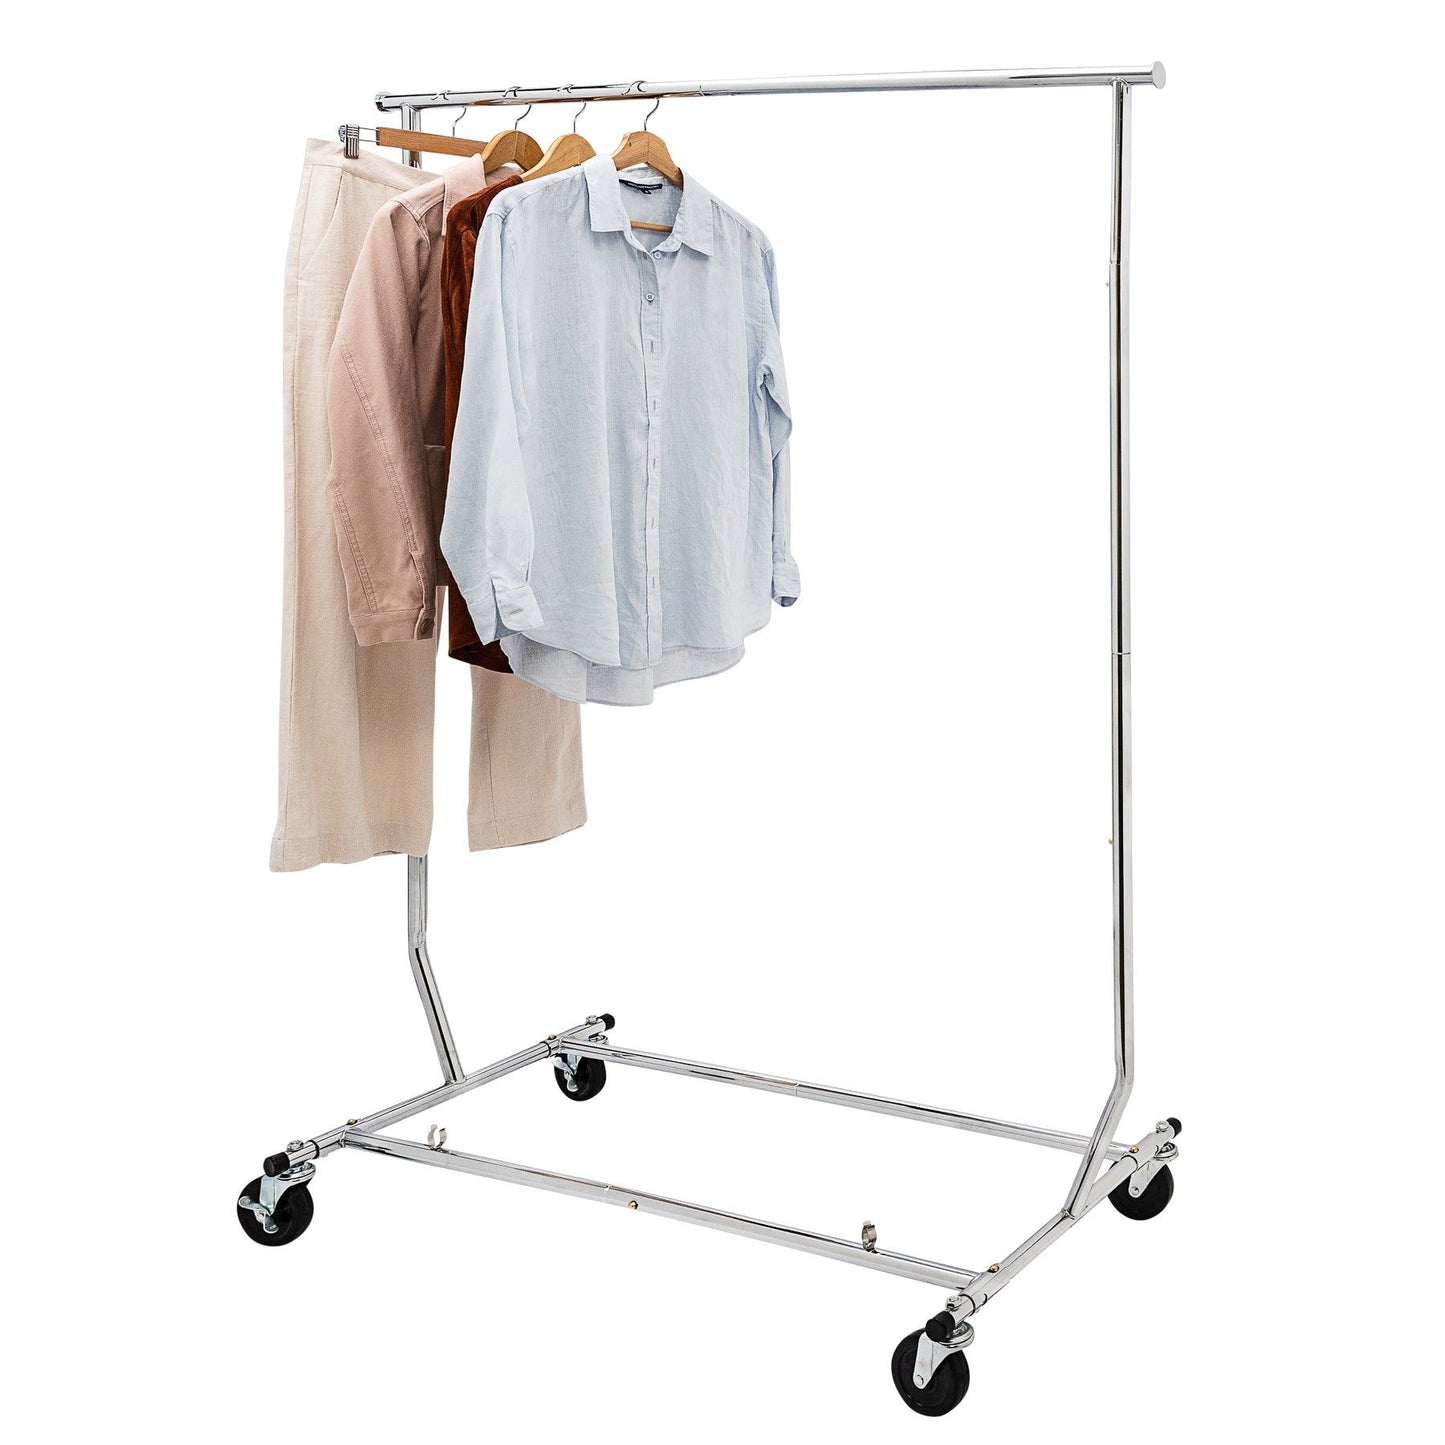 Heavy Duty Clothes Rack- 150kgs Weight Capacity - Heavy Duty - Four Large Rubber Casters